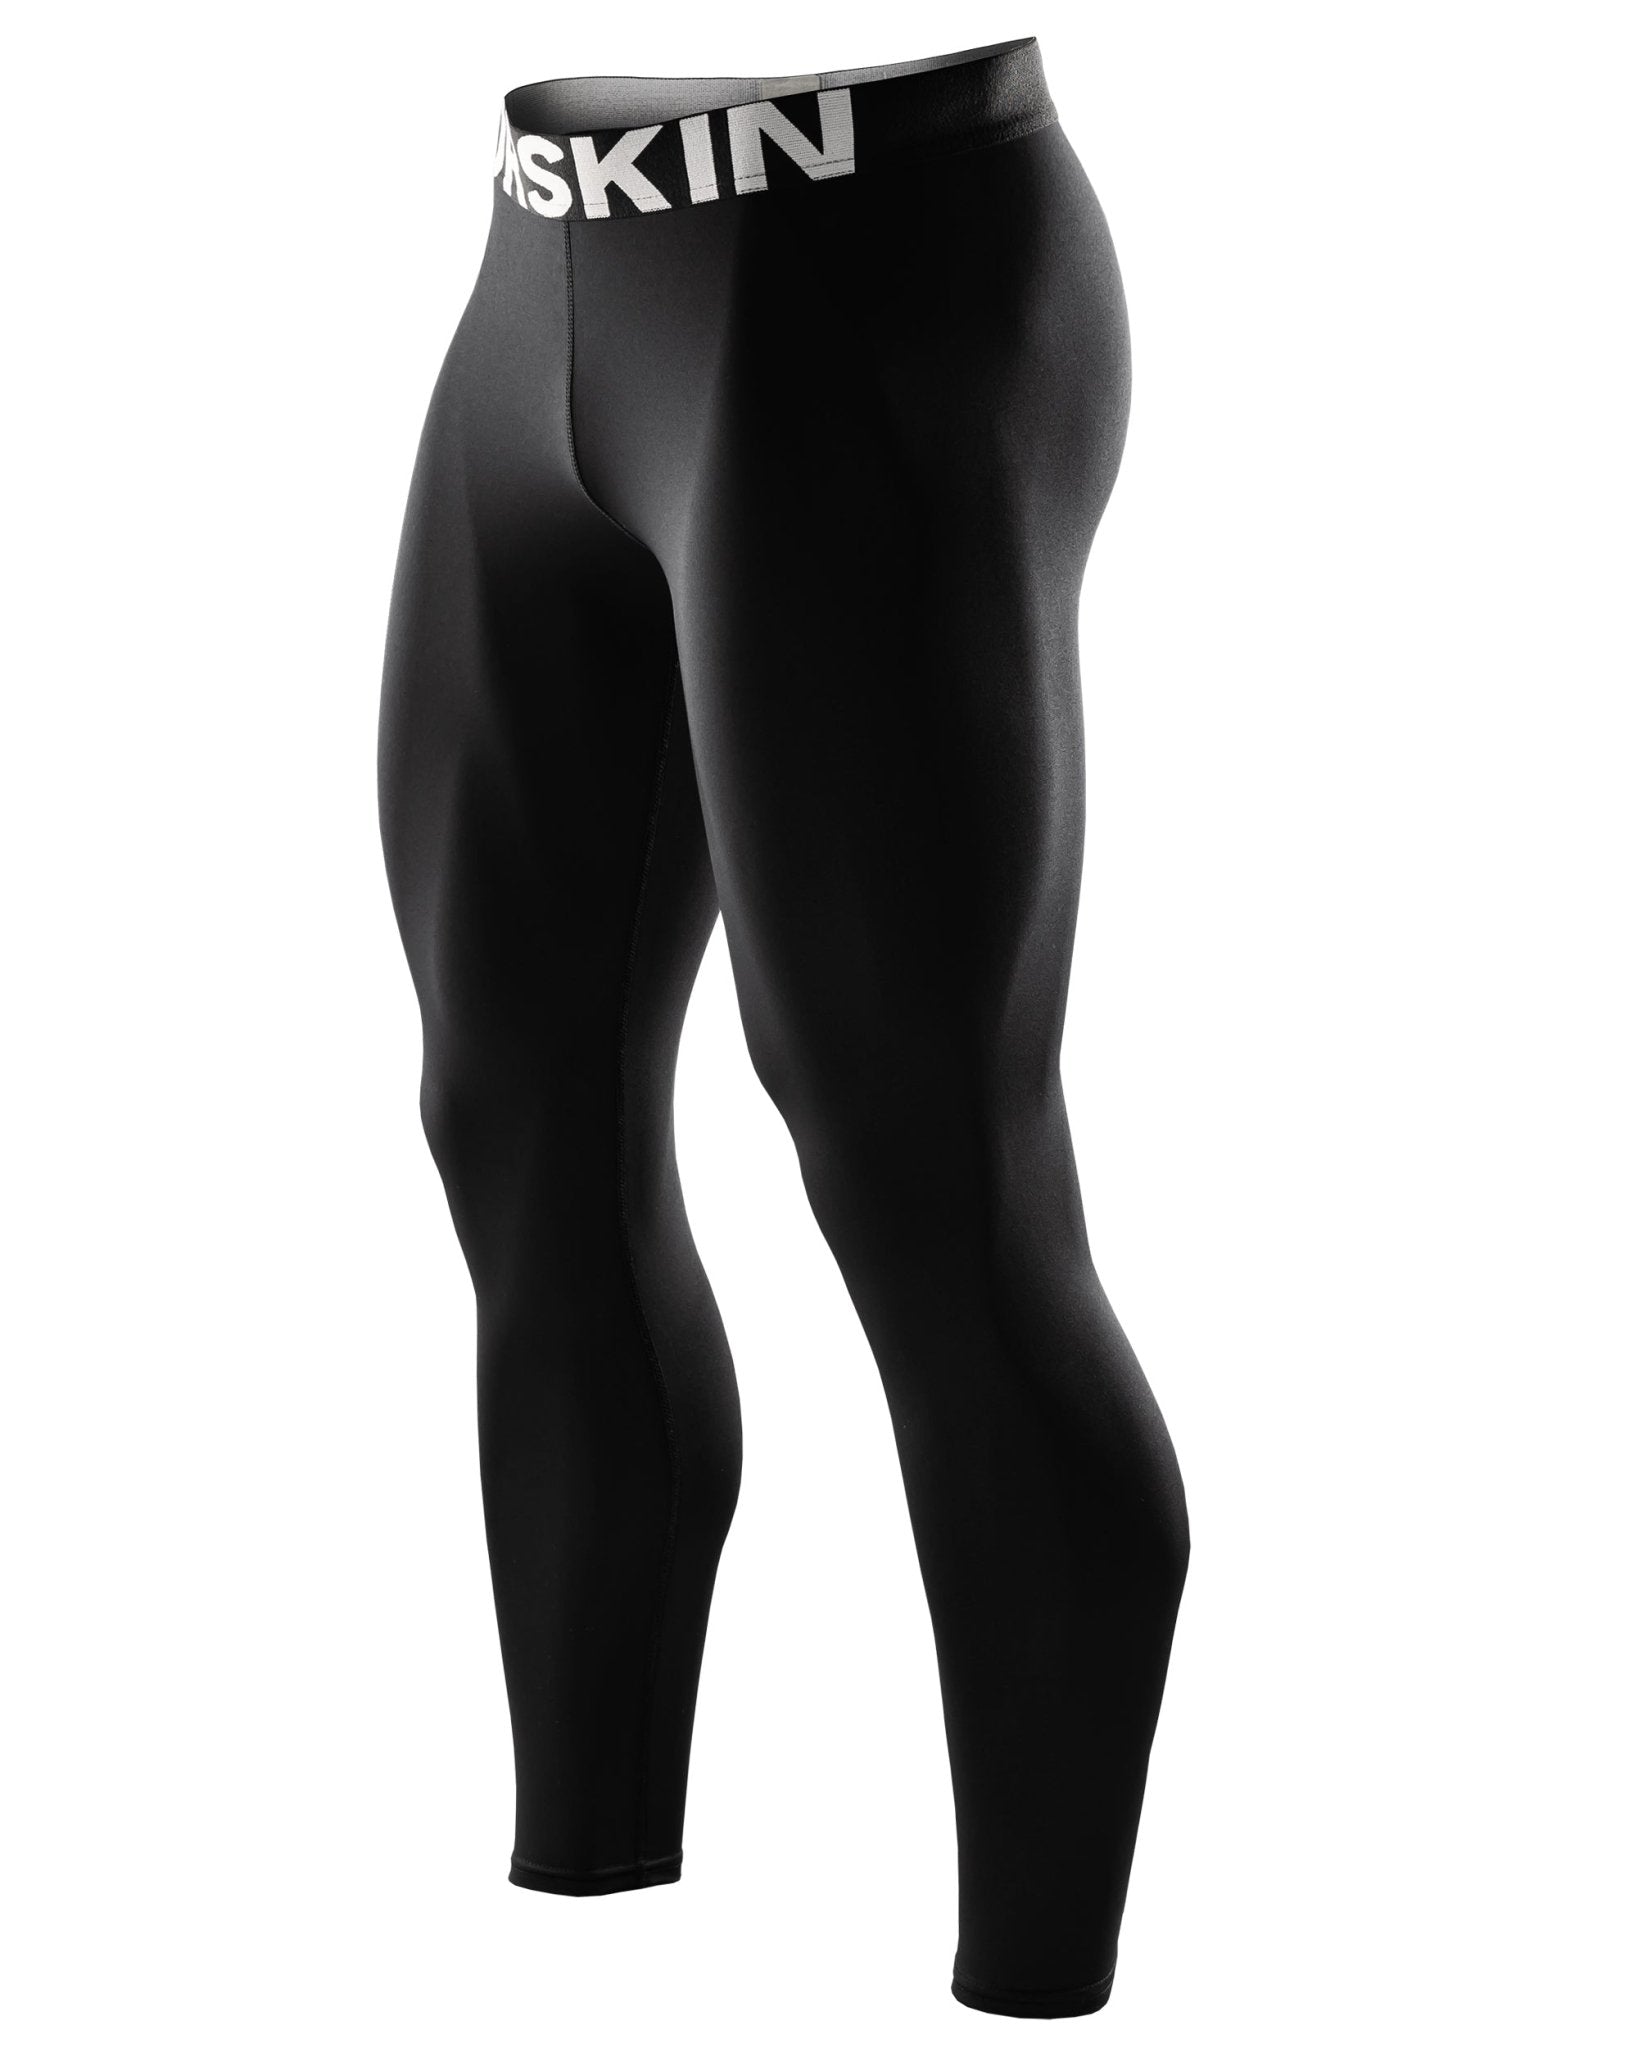 Powergear Dry Fit Standard Compression Pants 4Pack(All Black)